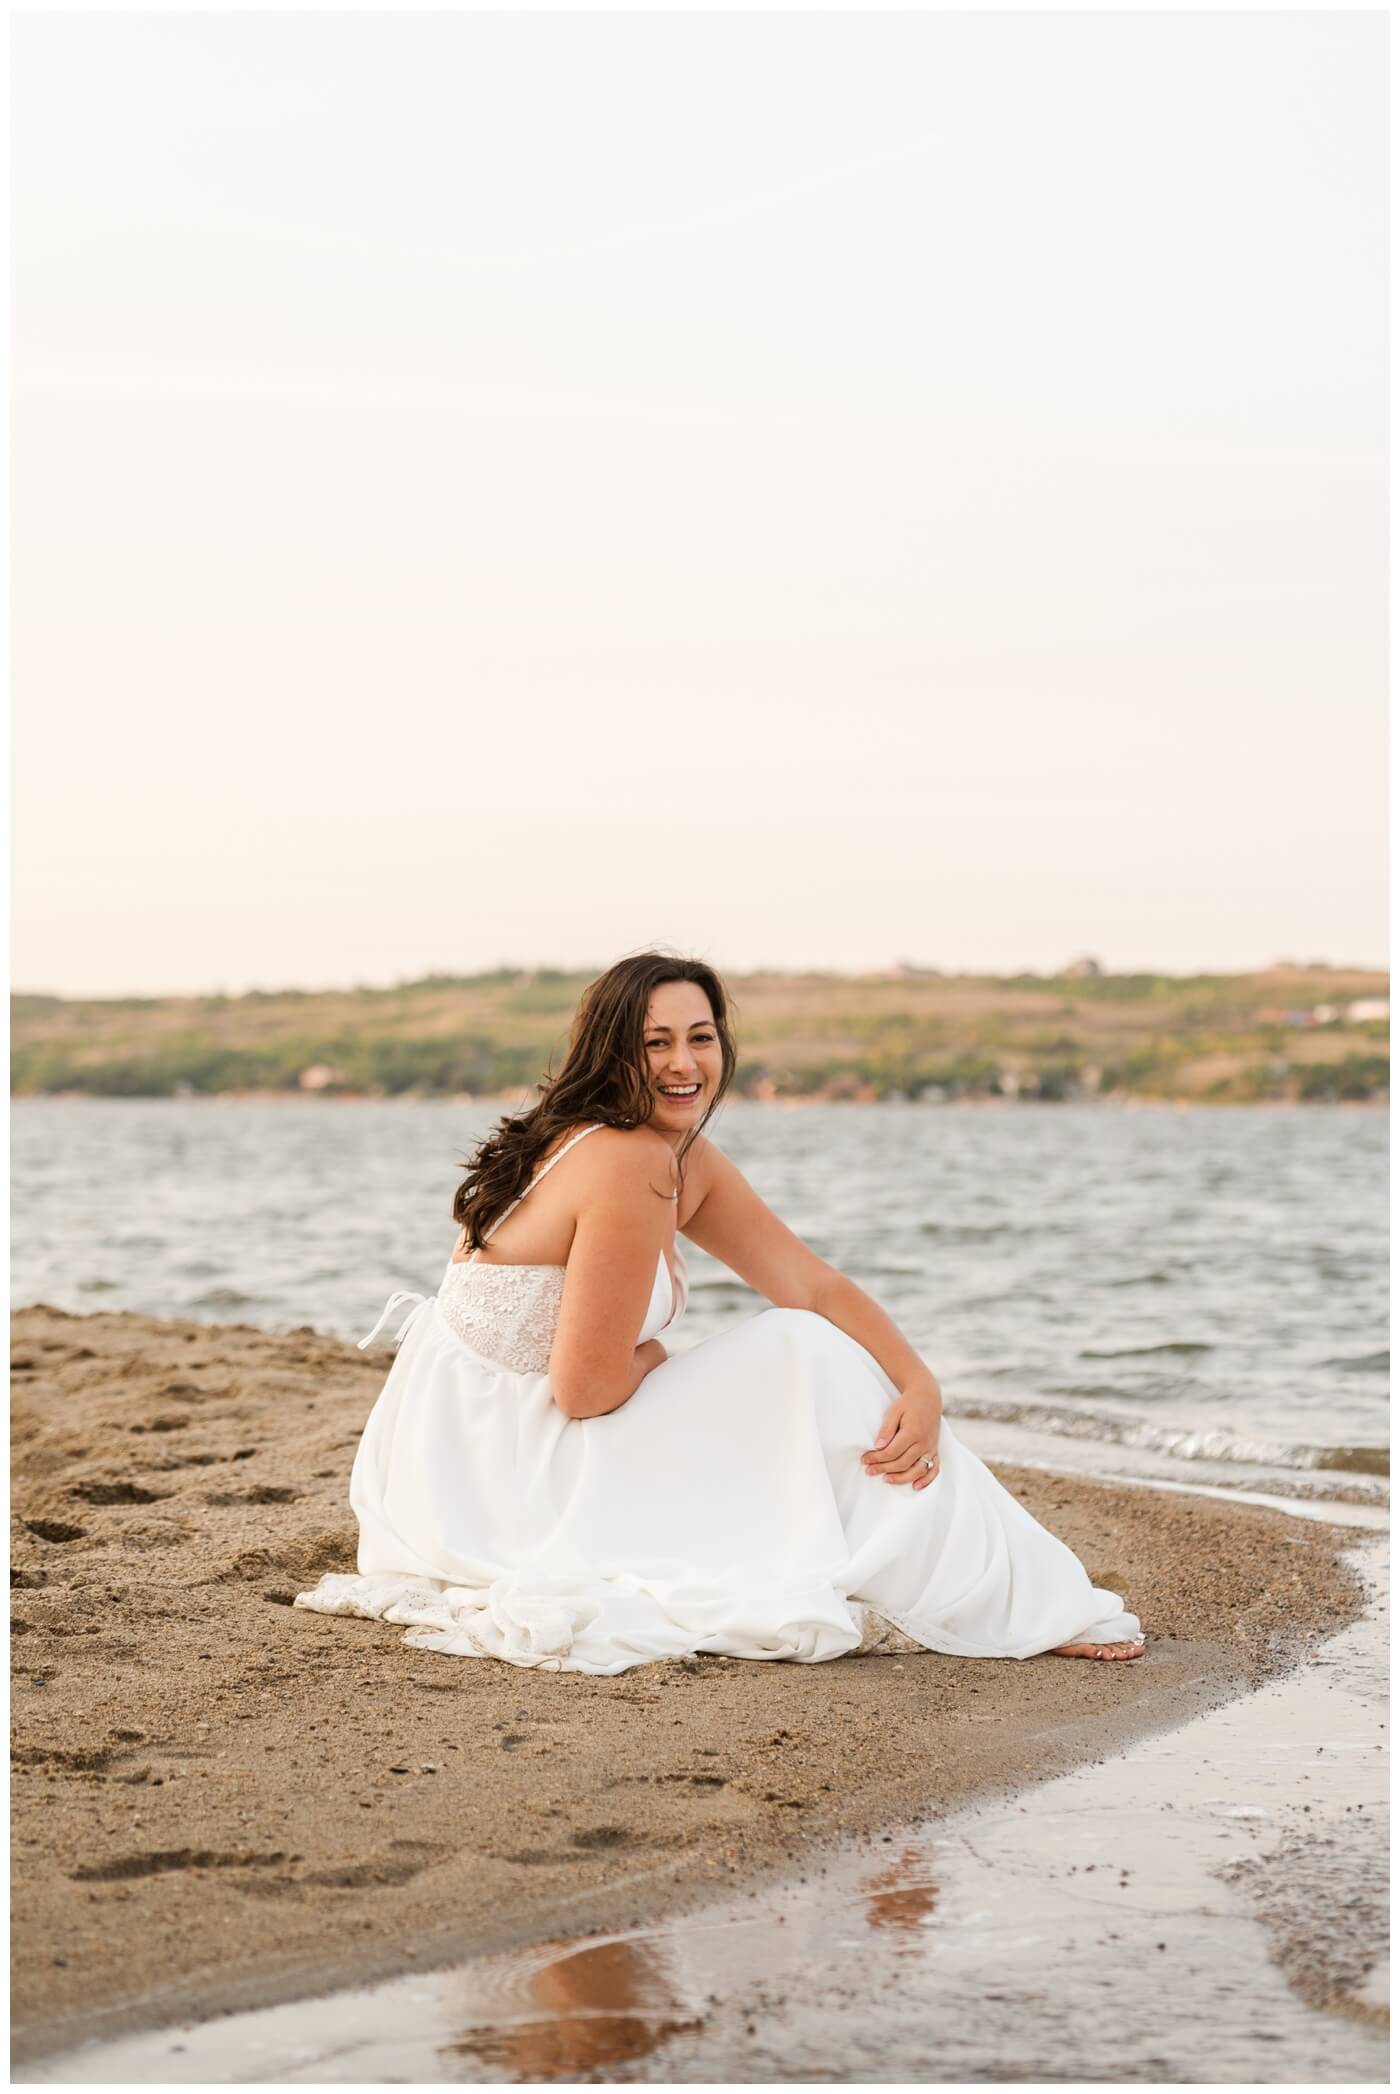 Tris & Jana - 08 - Regina Encore Session - Bride sits in the sand near the water